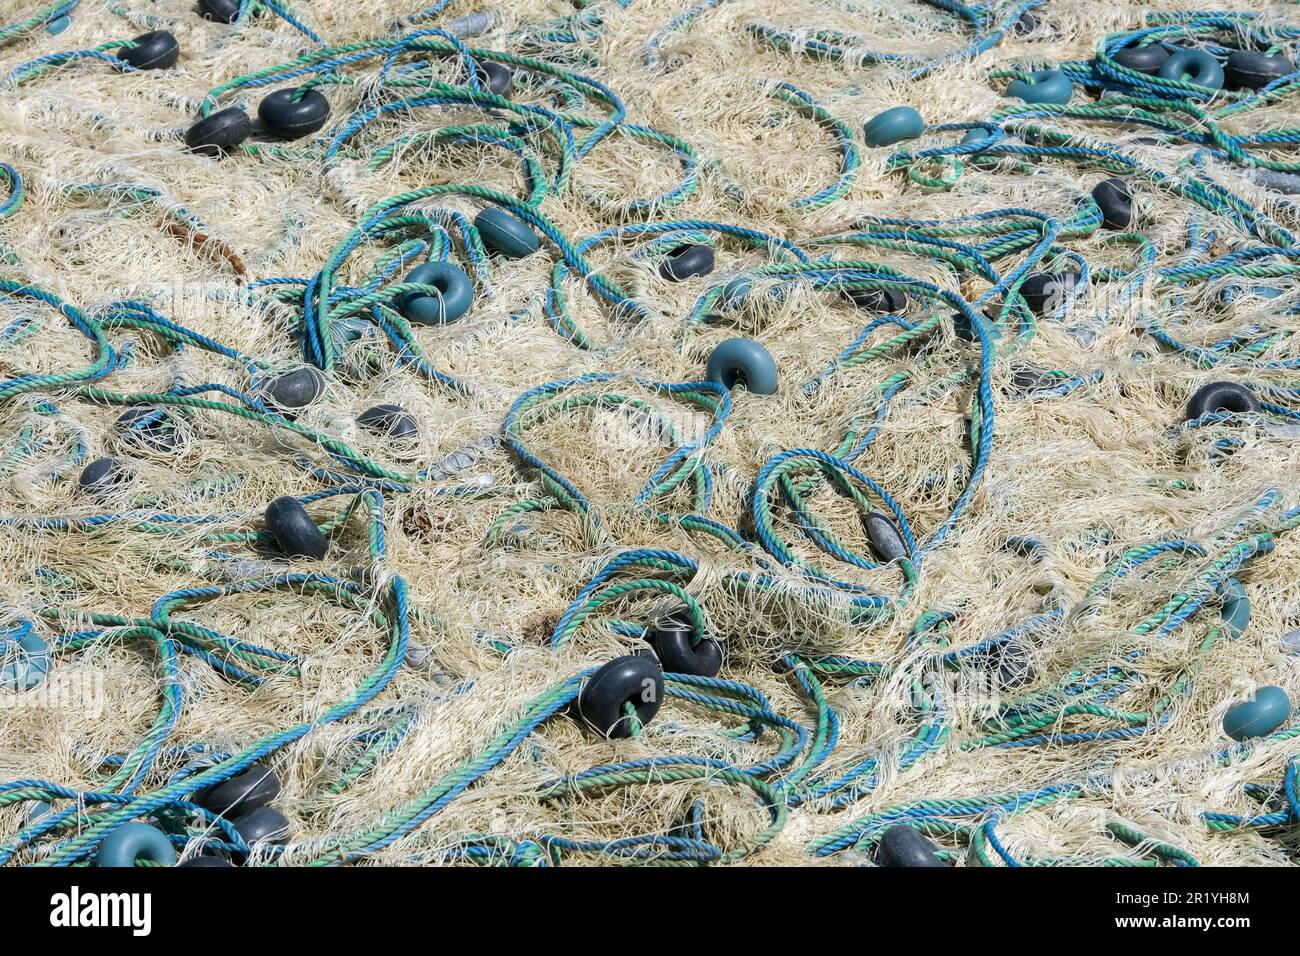 https://c8.alamy.com/comp/2R1YH8M/mixture-of-colorful-fishing-nets-floats-and-ropes-fisherman-material-background-2R1YH8M.jpg